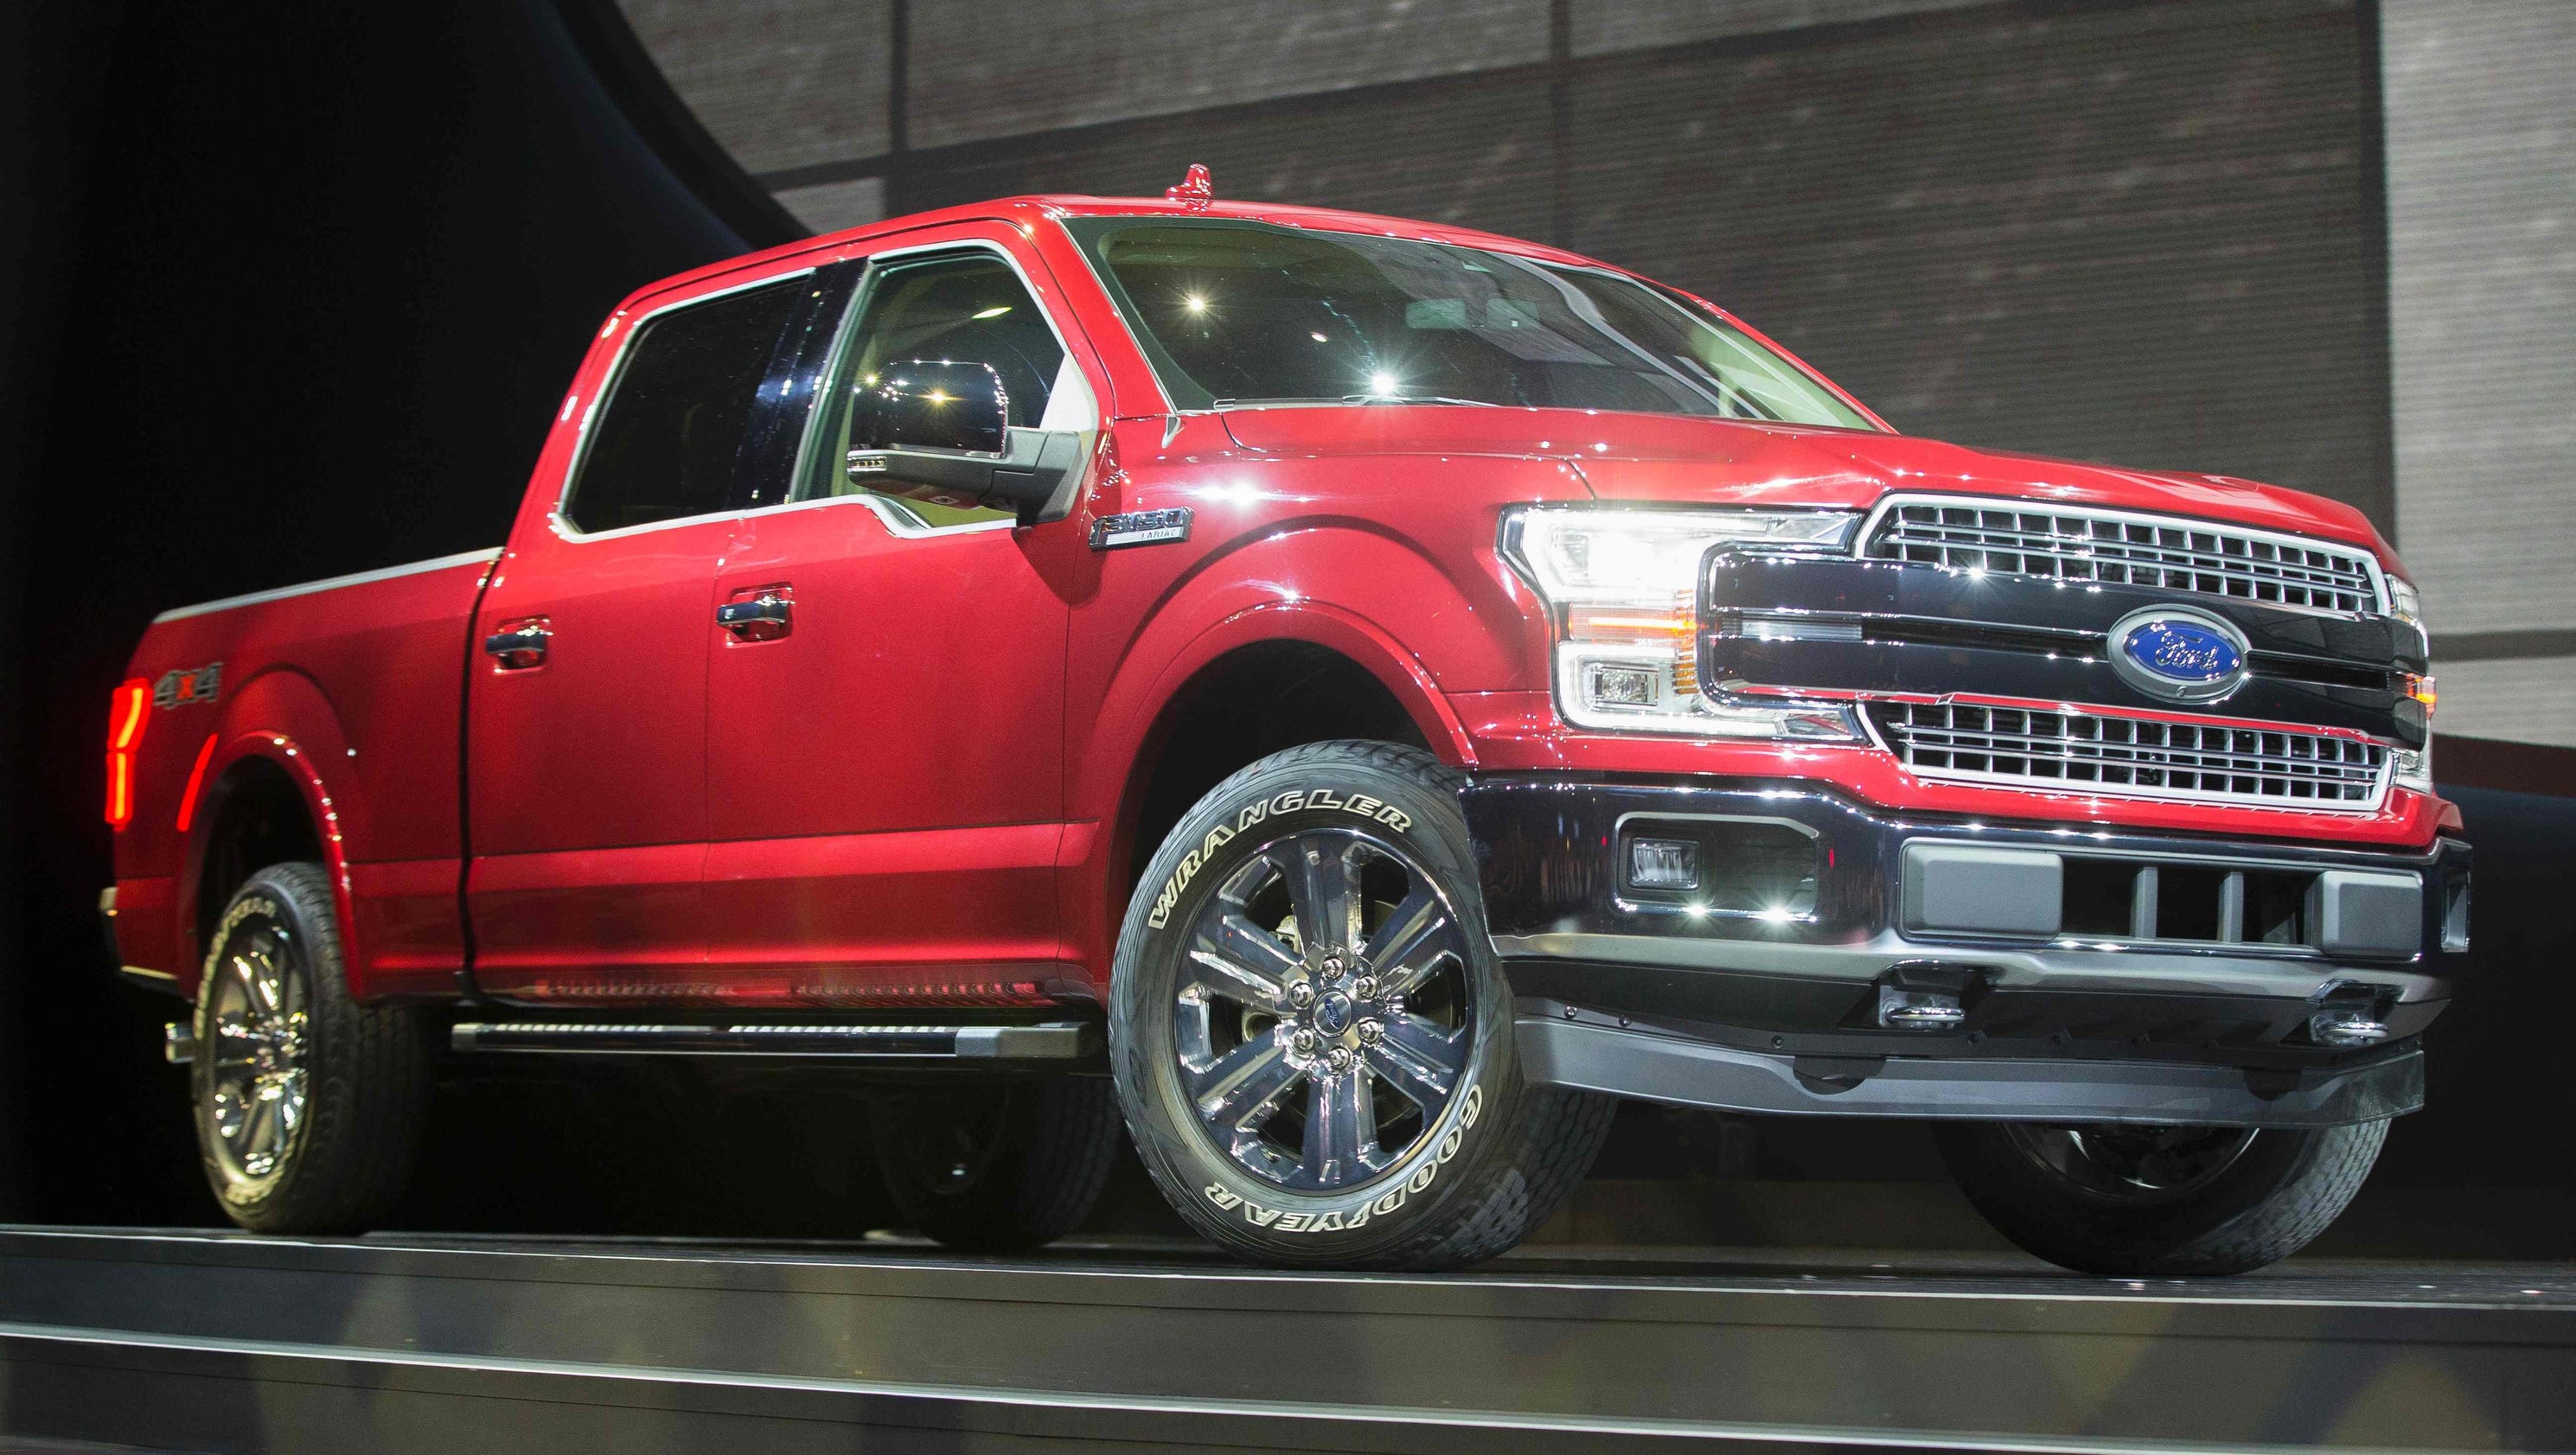 Fords U.S. sales rose 2.2% in May, while GM was down 1.3% and FCA dropped 1%